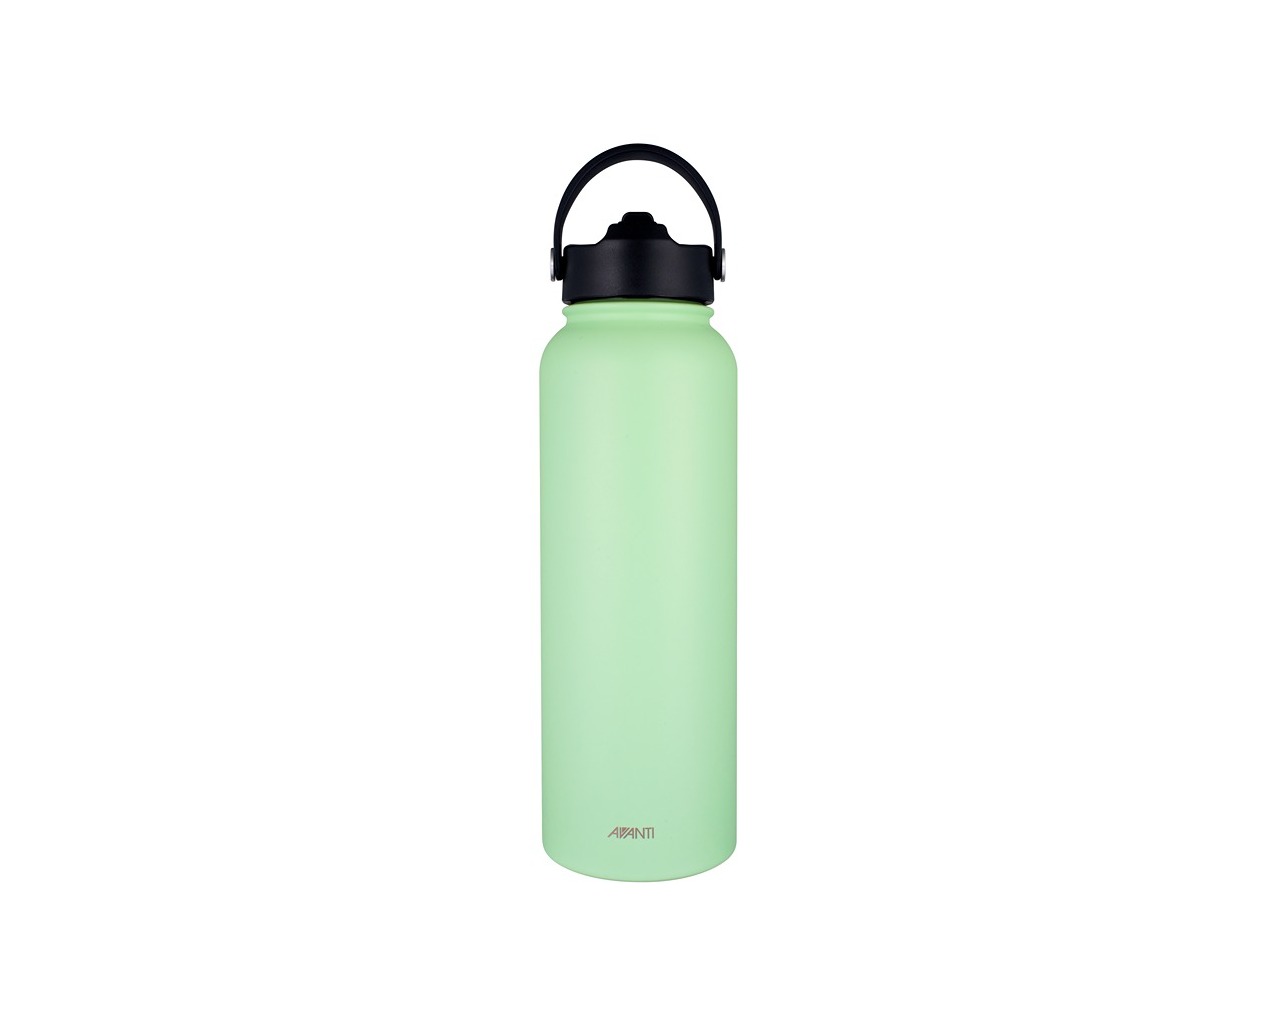 Avanti HydroSport Sipper Insulated Bottle 1.1 Litre Mint, , hi-res image number null